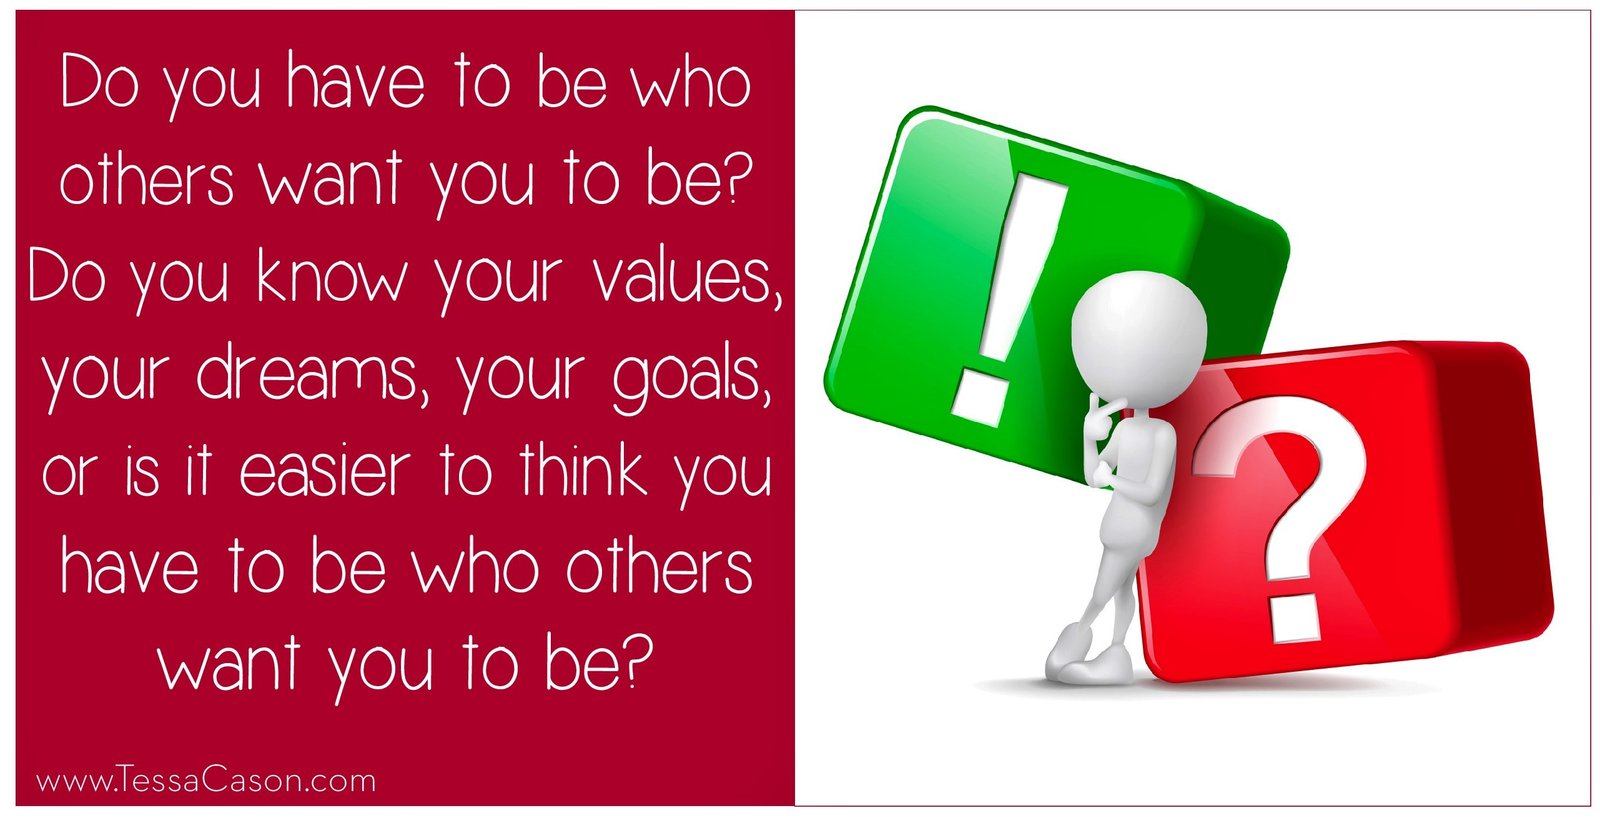 Do you have to be who others want you to be